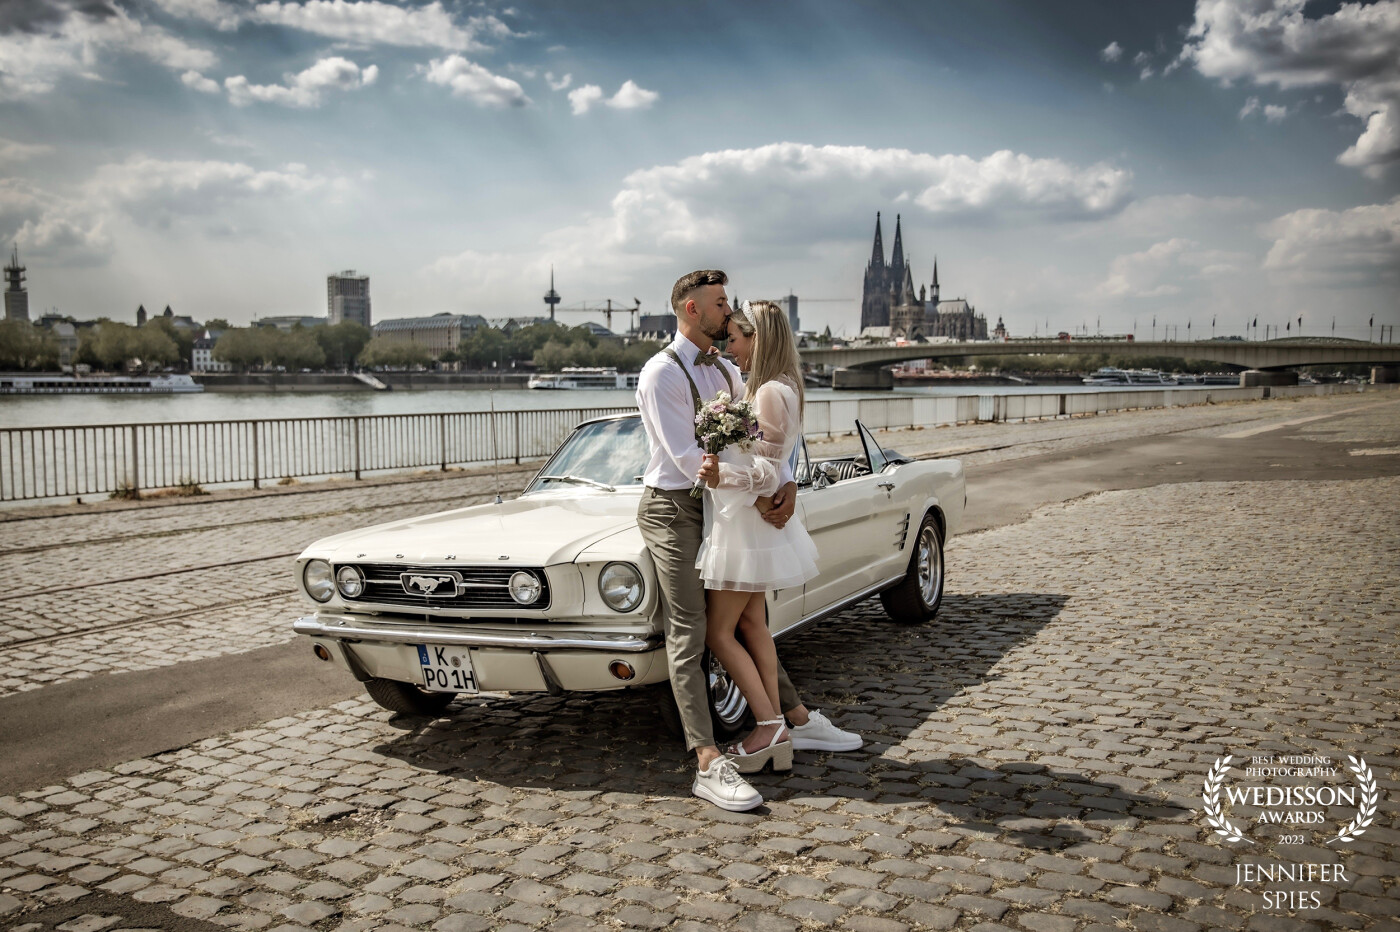 A shot from Alina and Paco’s beautiful wedding in front of the the landmark of Cologne, the Cologne Cathedral. Of course, the perfect wedding car should not be missing: the 1966 Ford Mustang.